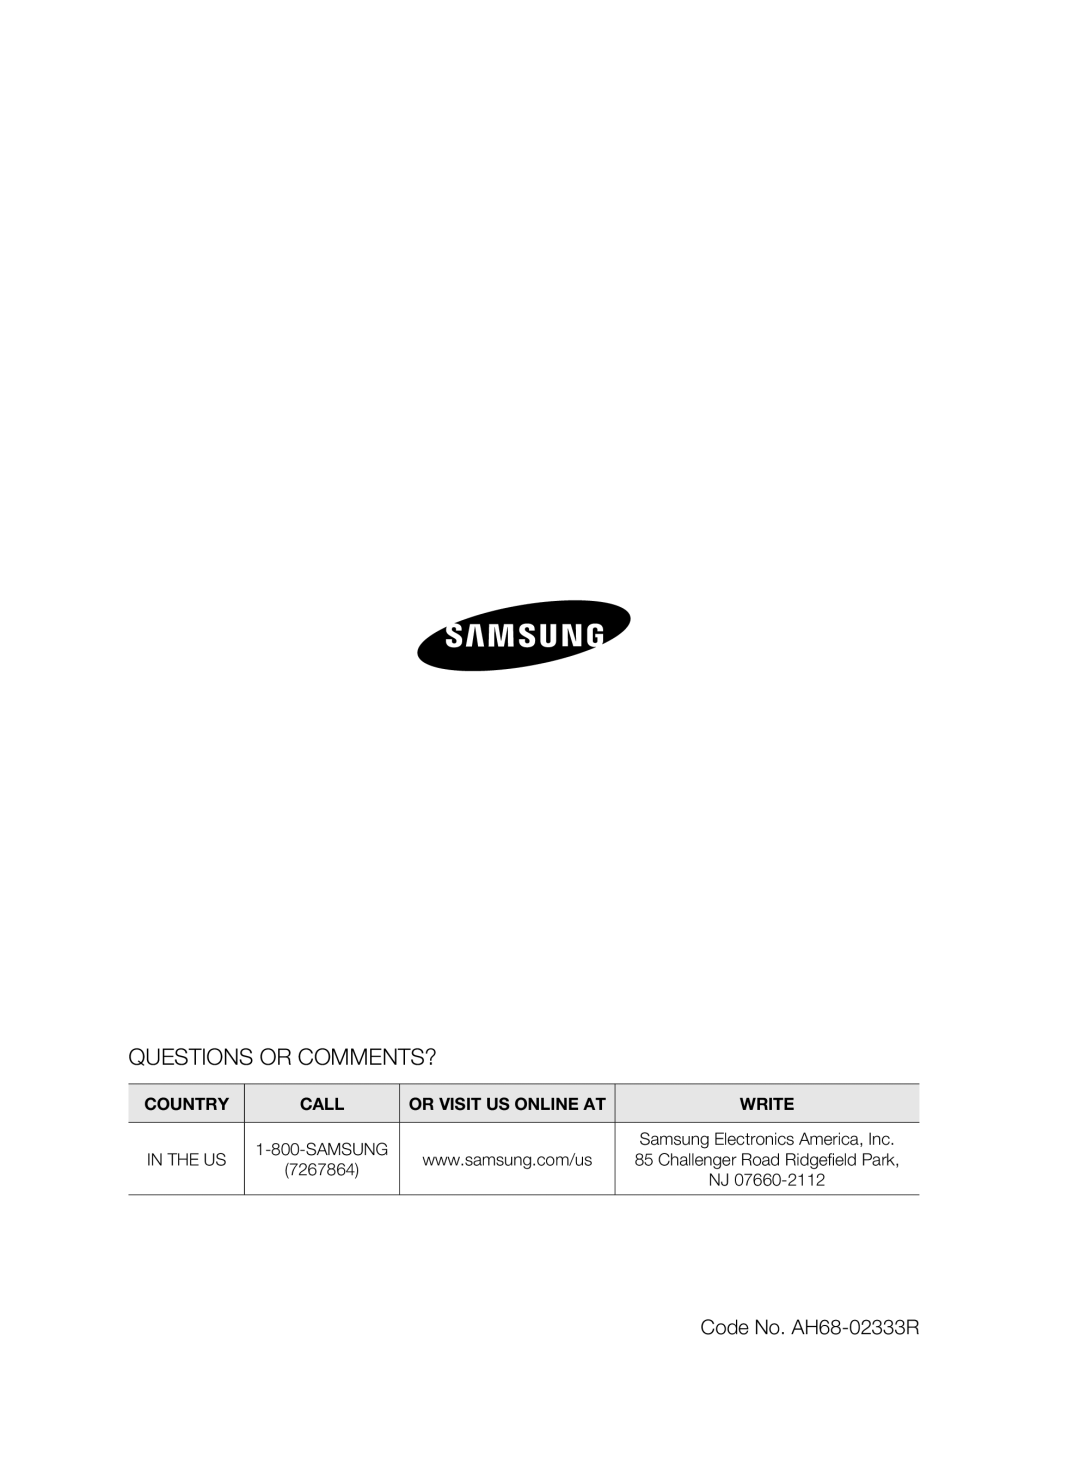 Samsung HT-D550, HT-D553, HT-D555 Questions Or Comments?, Code No. AH68-02333R, Country, Call, Or Visit Us Online At, Write 